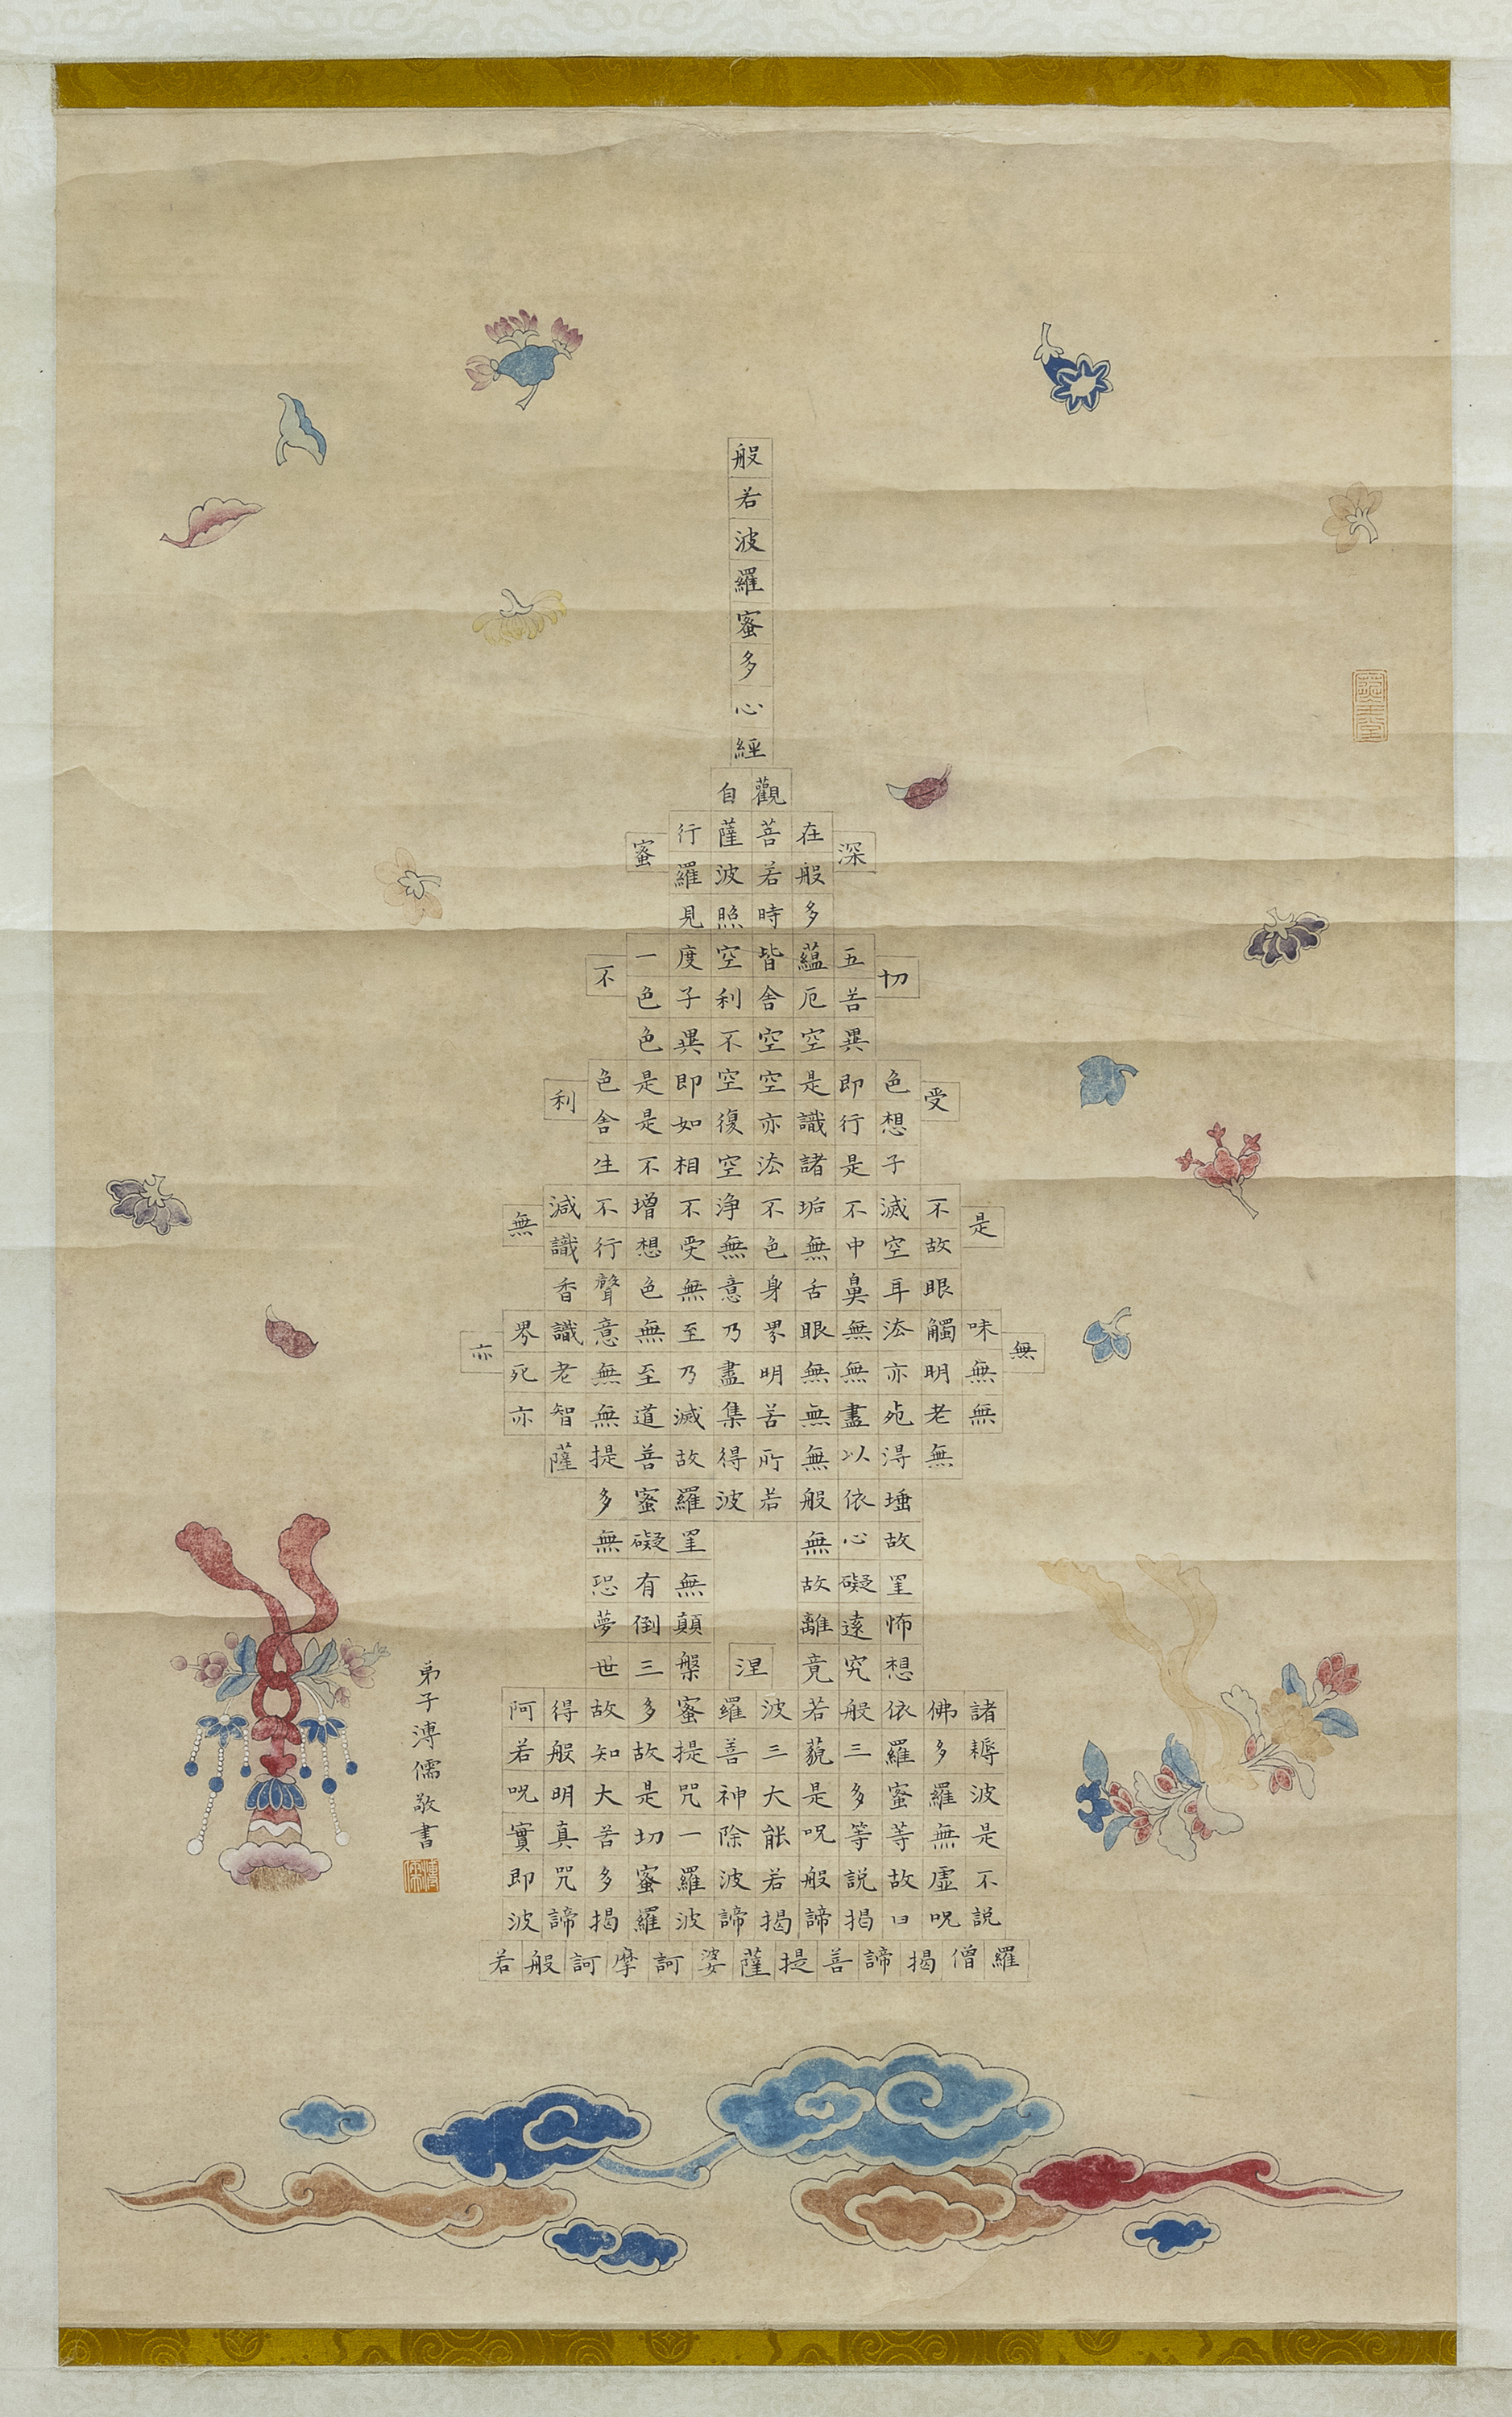 A CHINESE MIXED MEDIA ON PAPER 20TH CENTURY.